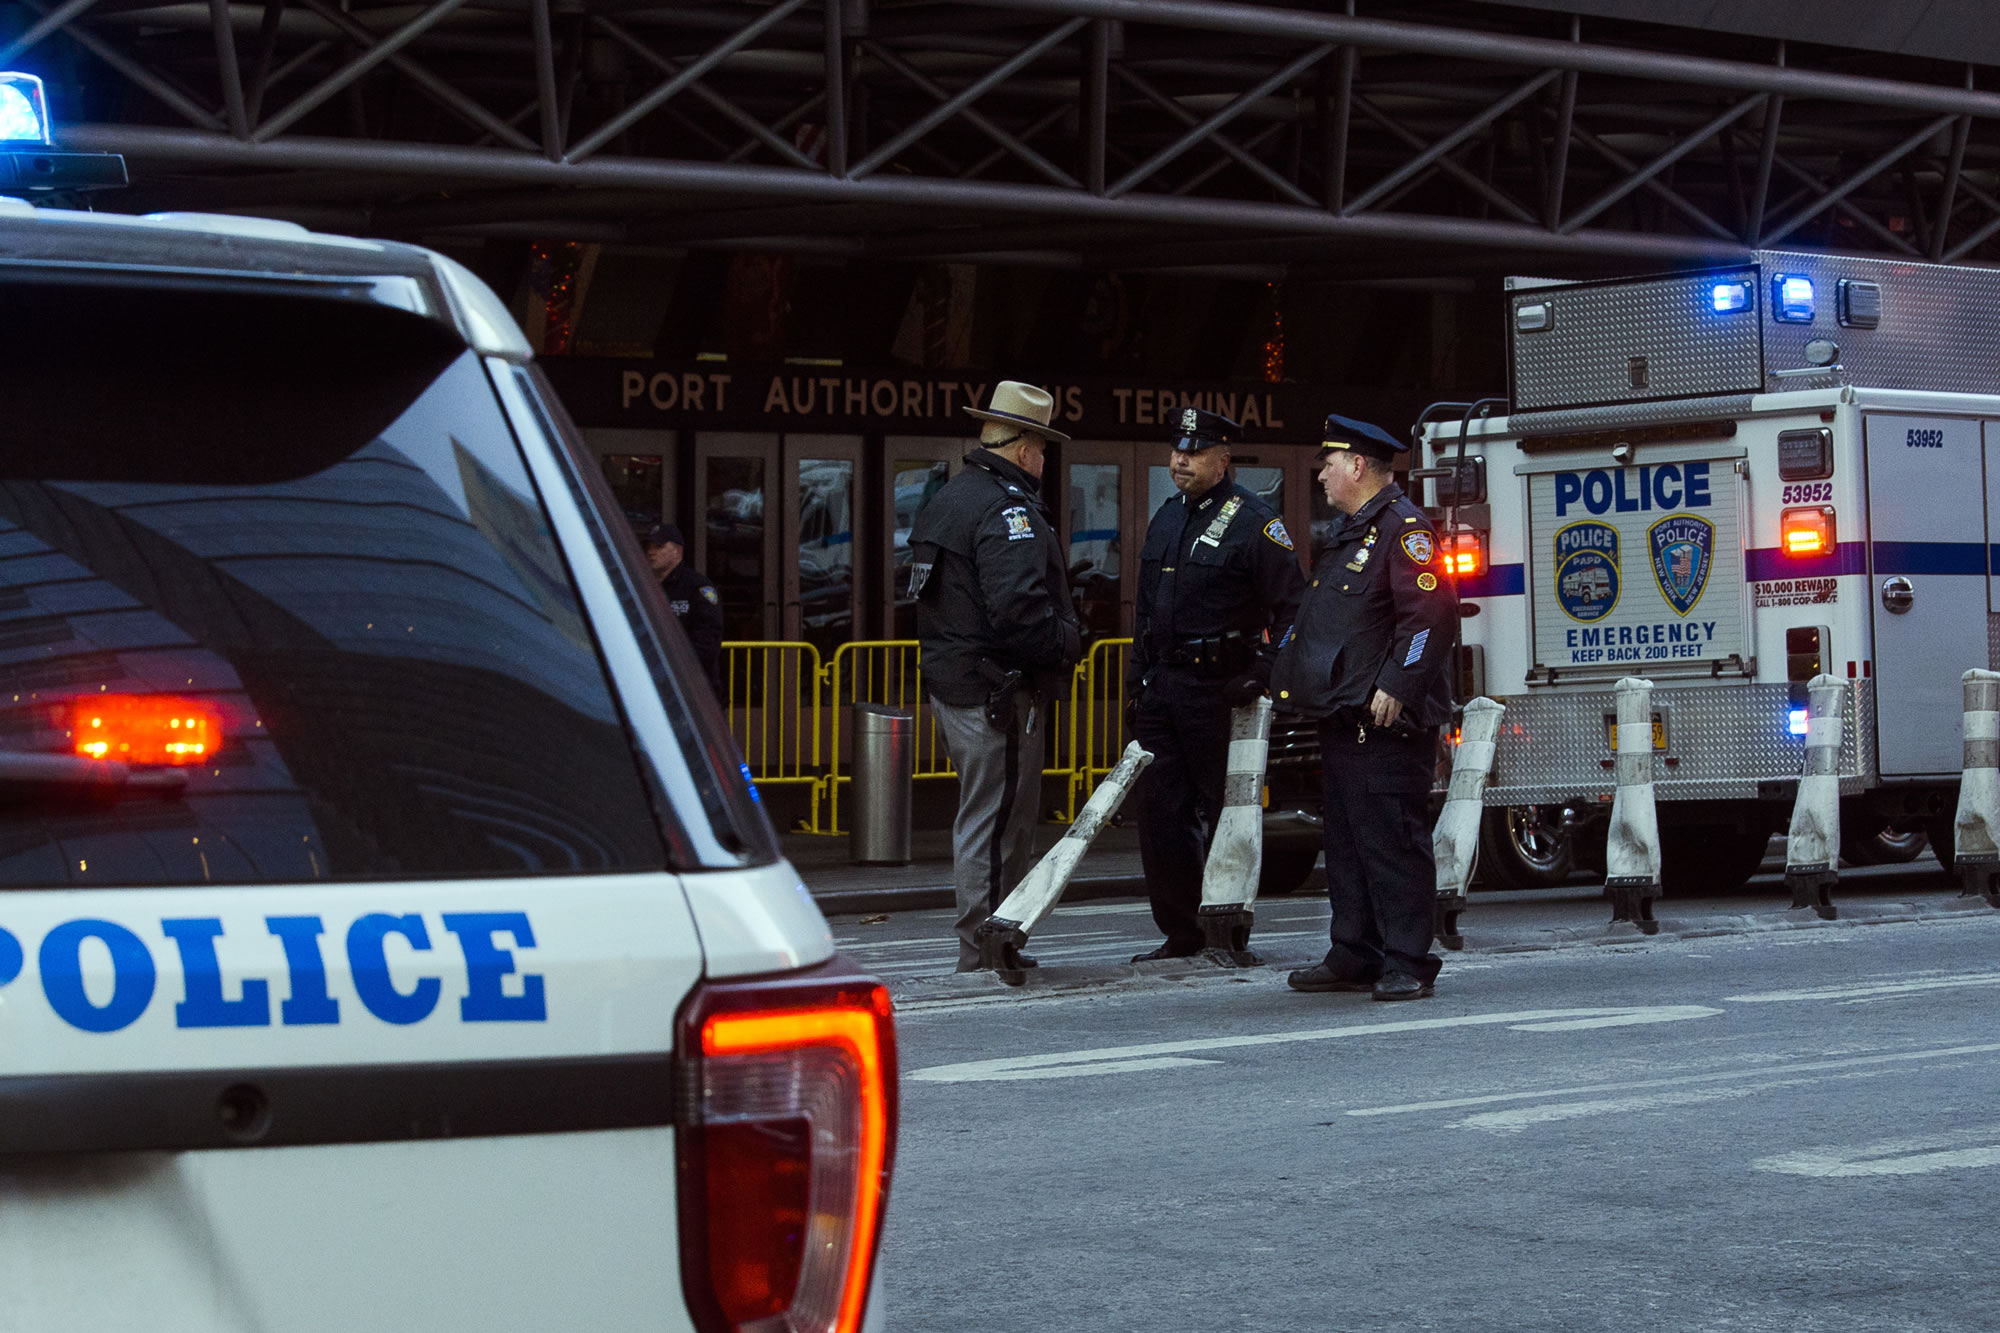 Police stand guard in front of the Port Authority Bus Terminal near New York, Times Square following an explosion on Monday, Dec. 11, 2017. Police say the explosion happened in an underground passageway under 42nd Street between 7th and 8th Avenues.